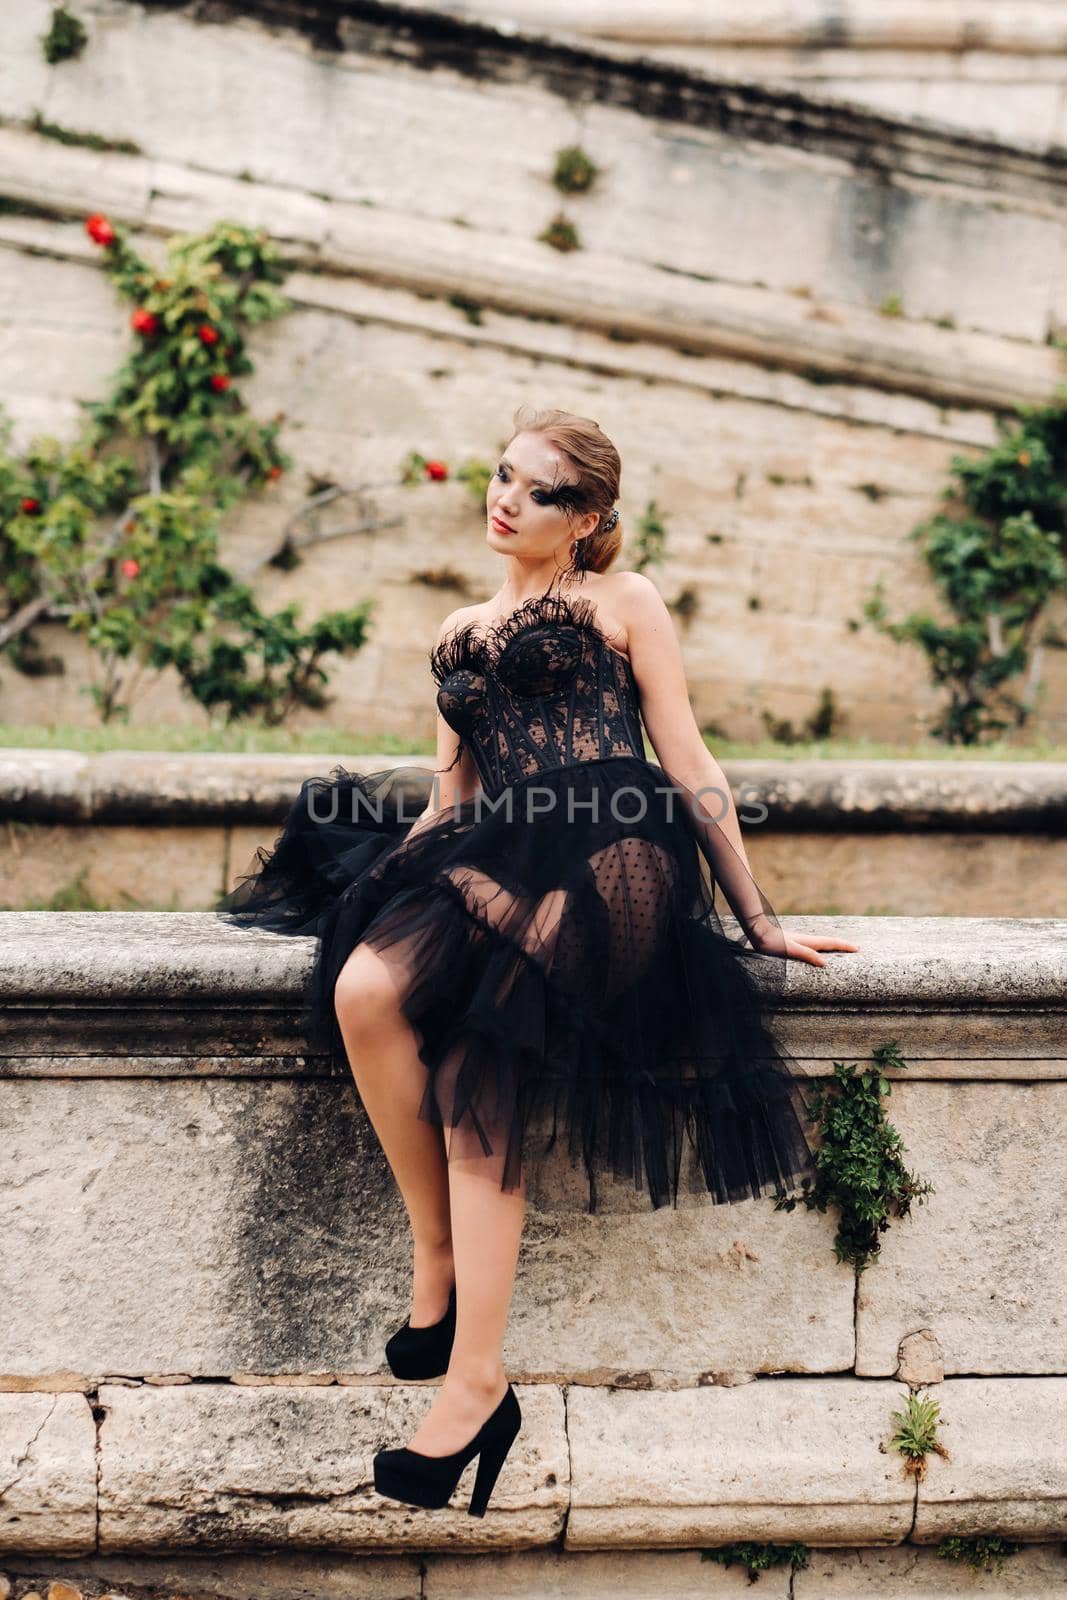 A stylish bride in a black wedding dress poses in the ancient French city of Avignon. Model in a beautiful black dress. Photo shoot in Provence